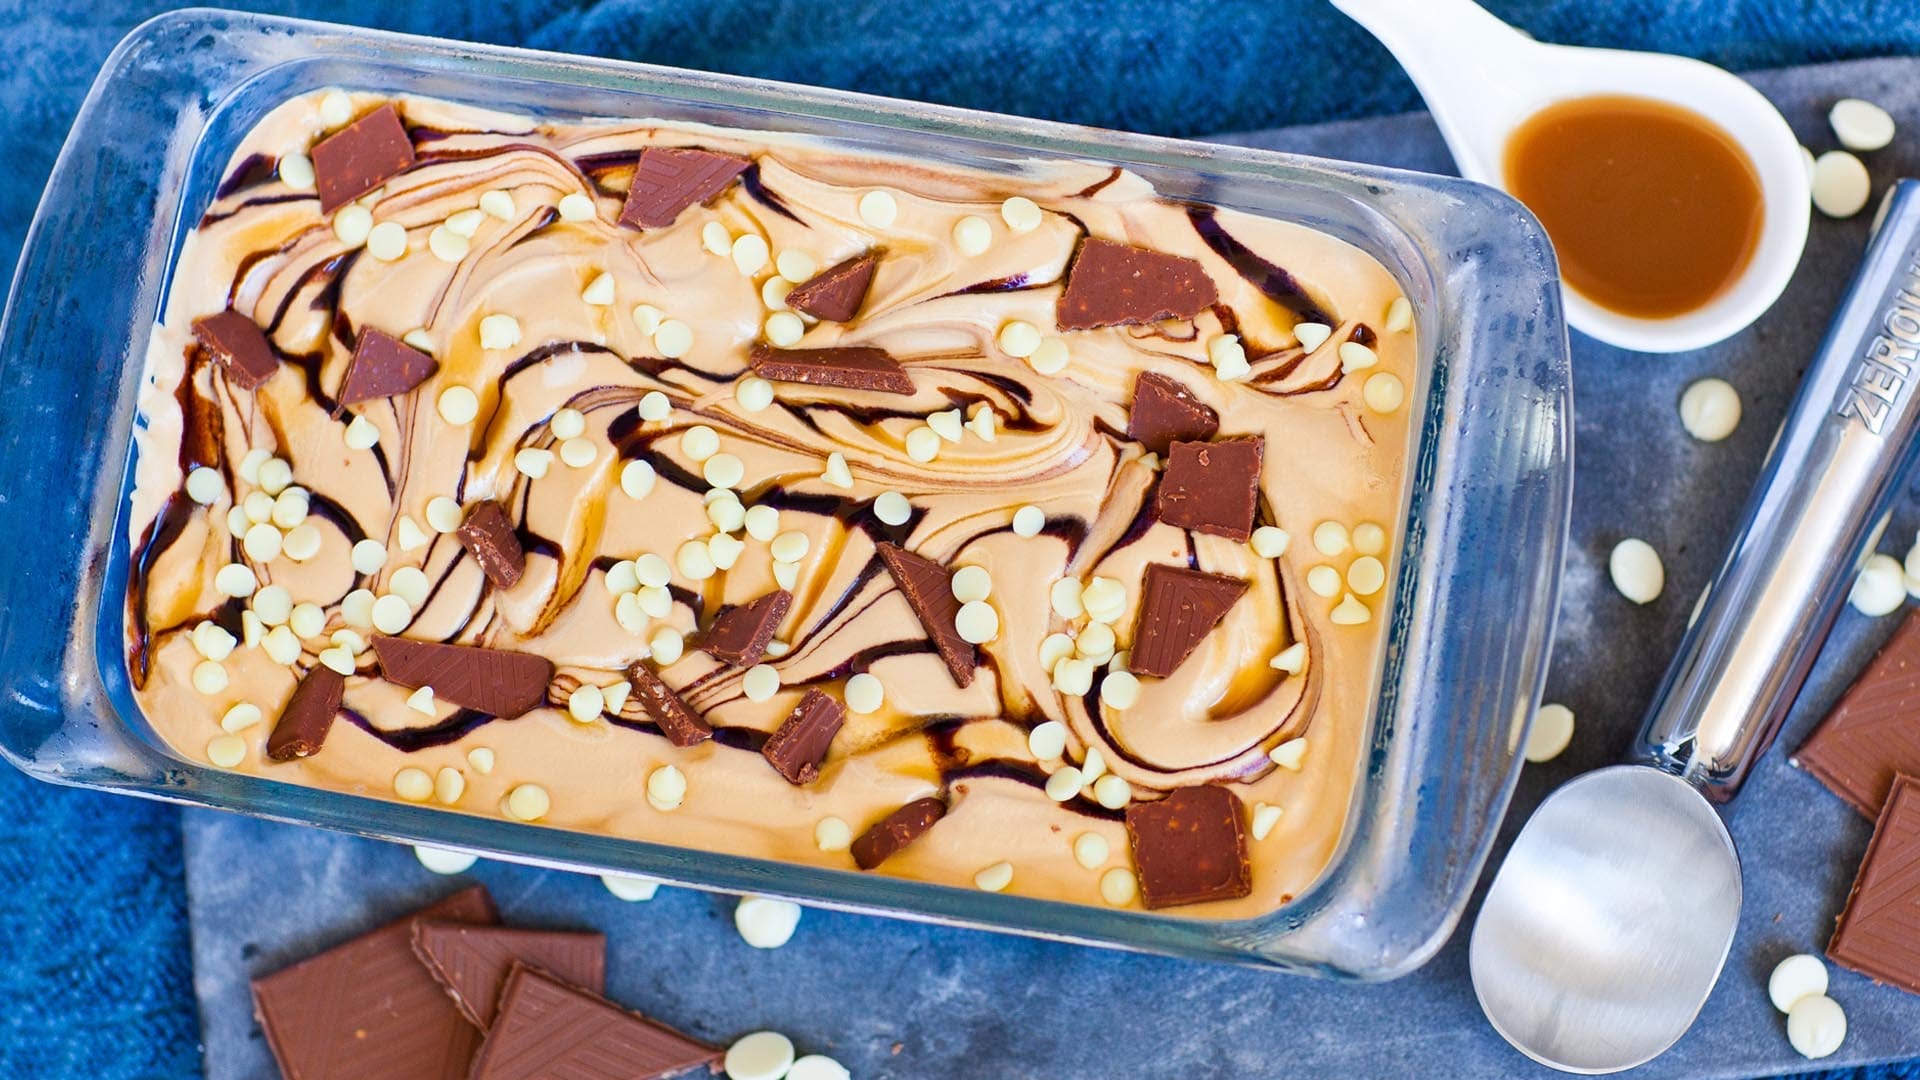 Coffee Ice Cream With Caramel Chocolate Chunks - Afternoon Baking With ...